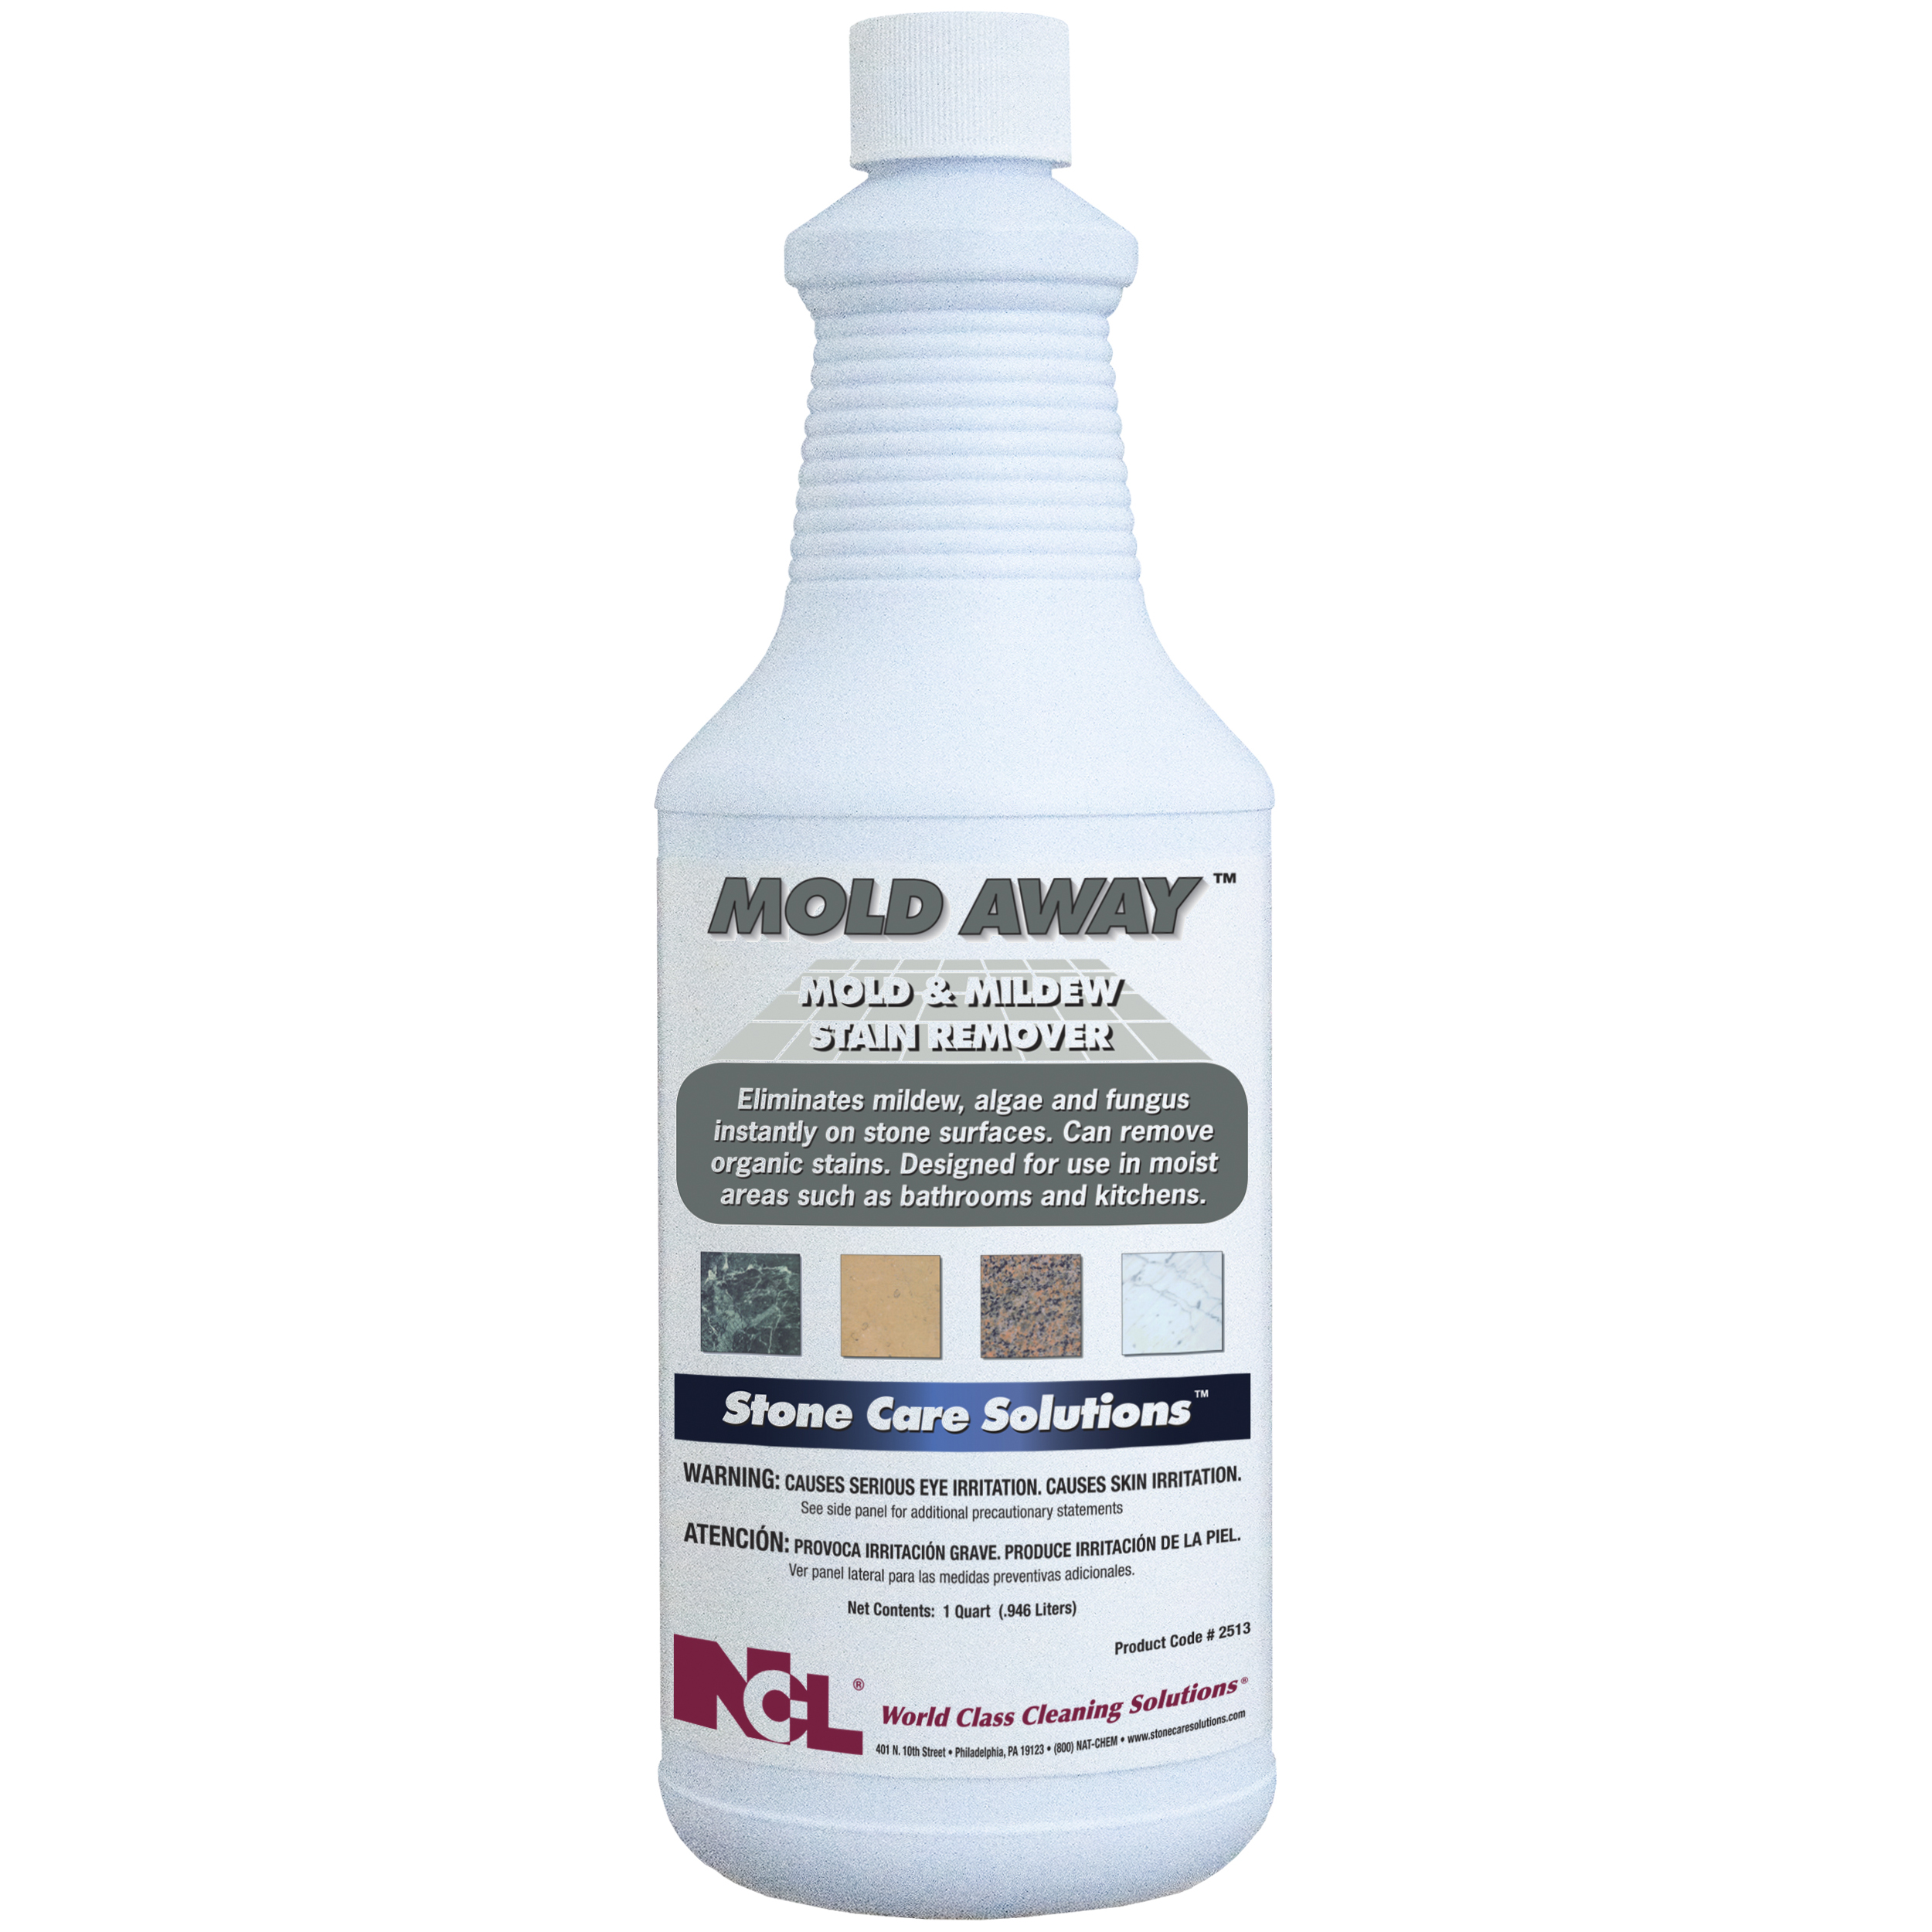  MOLD AWAY Mold and Mildew Remover 12/32 oz (1 Qt.) Case (NCL2513) 